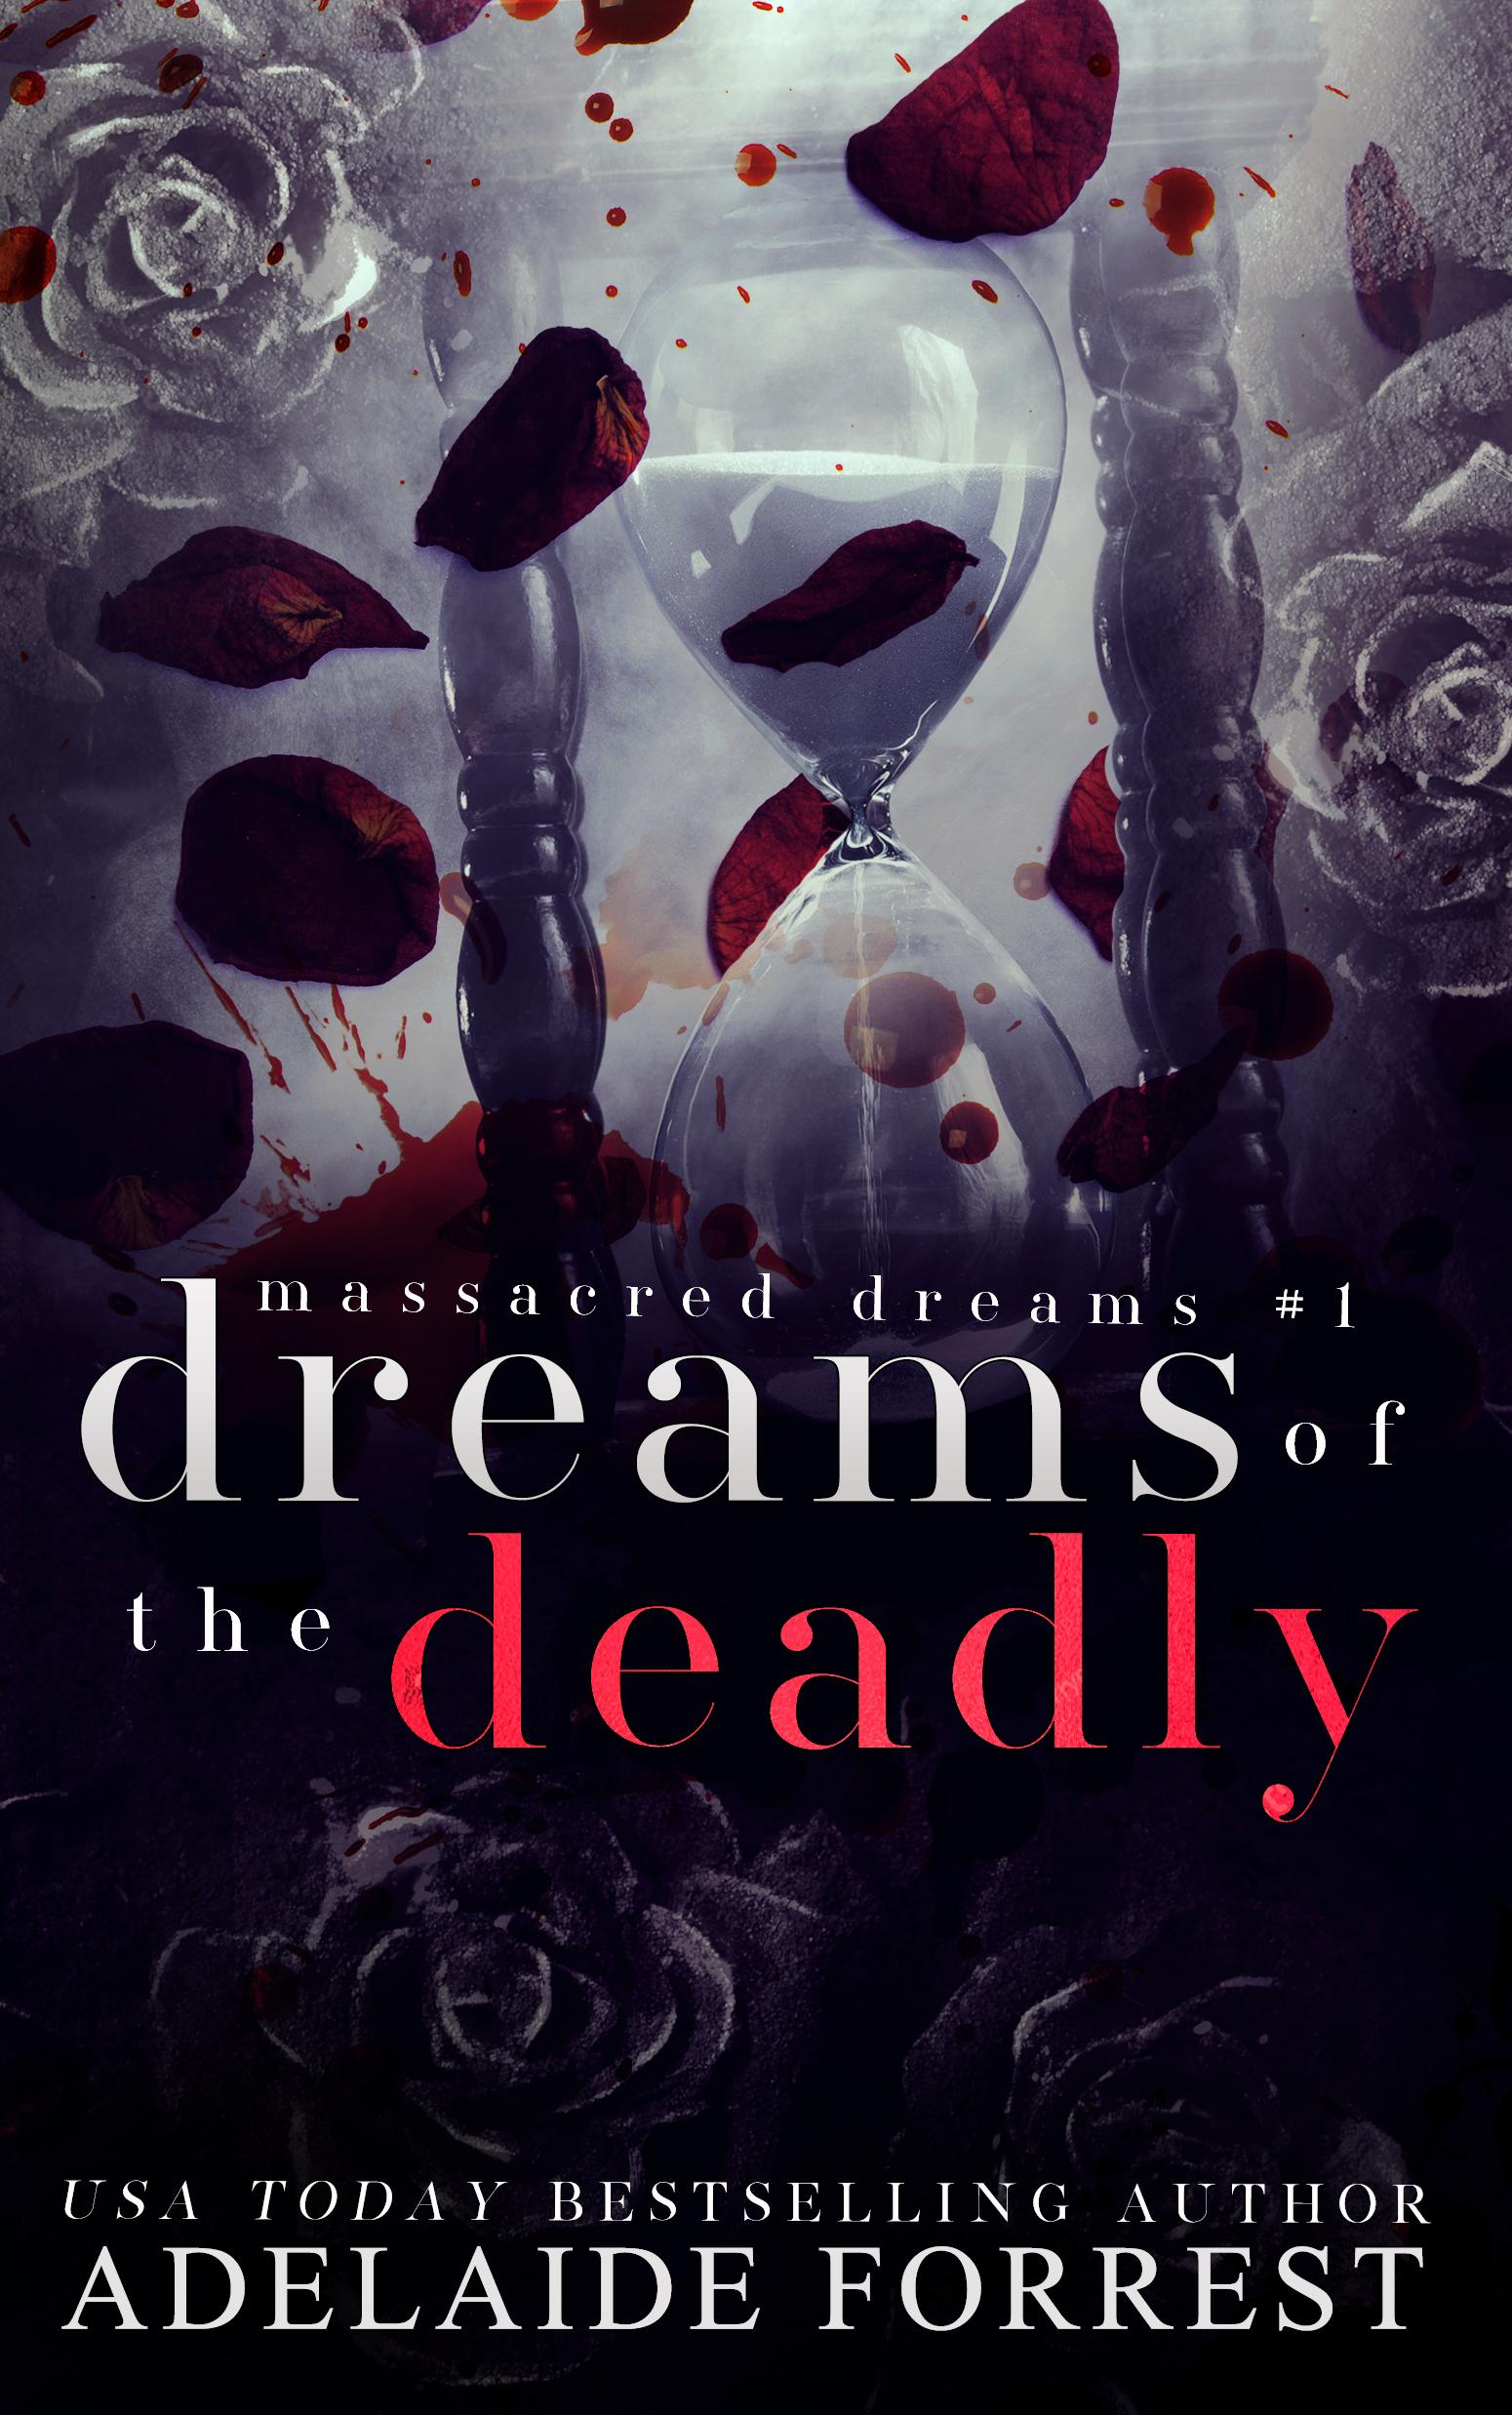 Dreams of the Deadly